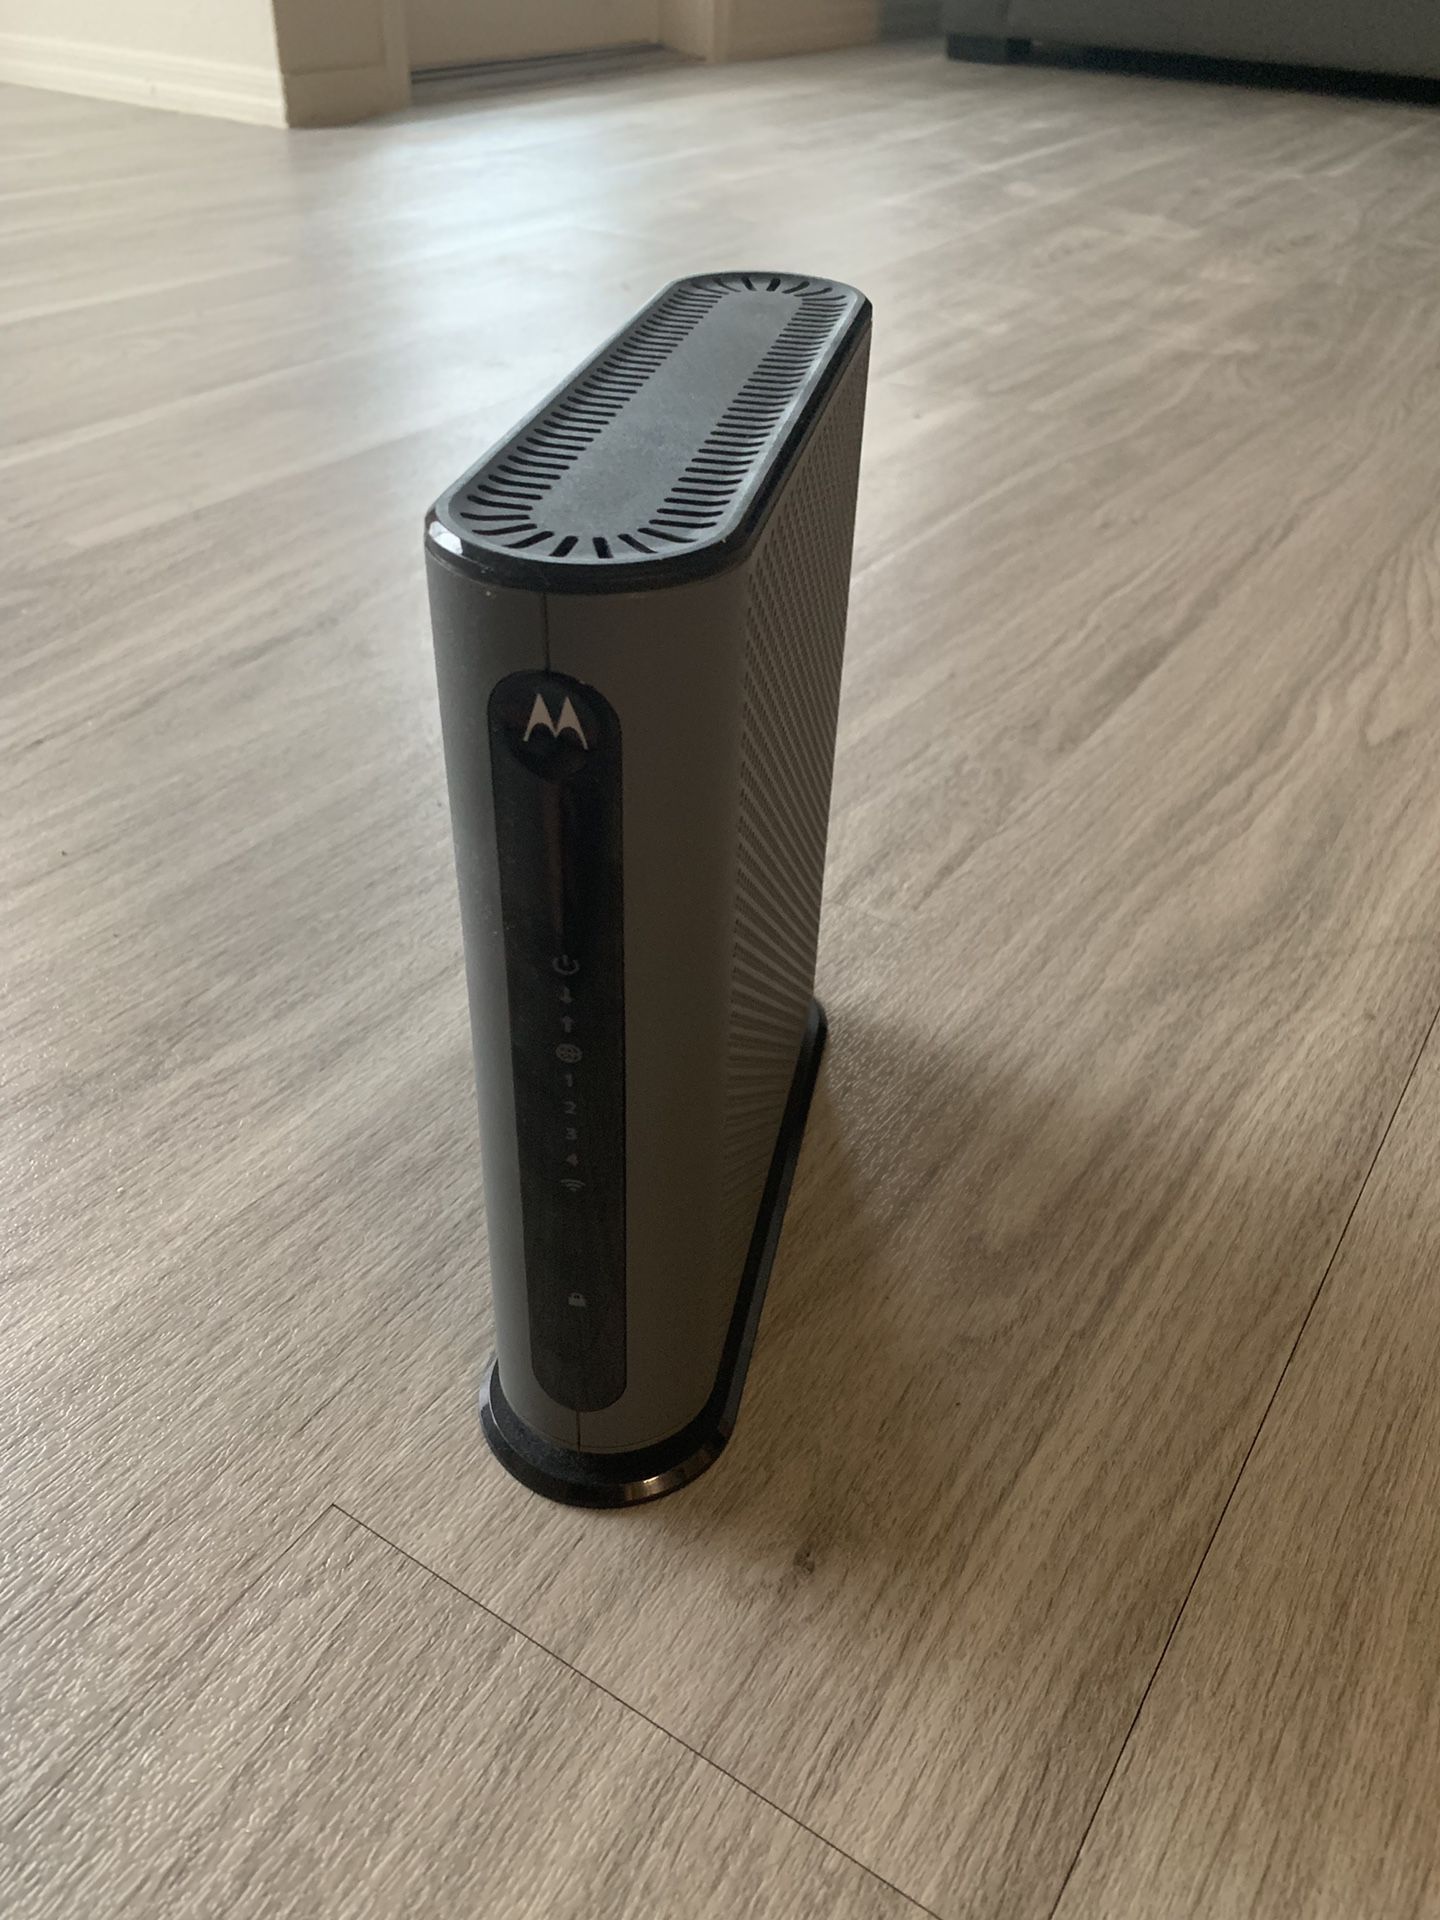 Motorola Cable Modem (works with Cox)